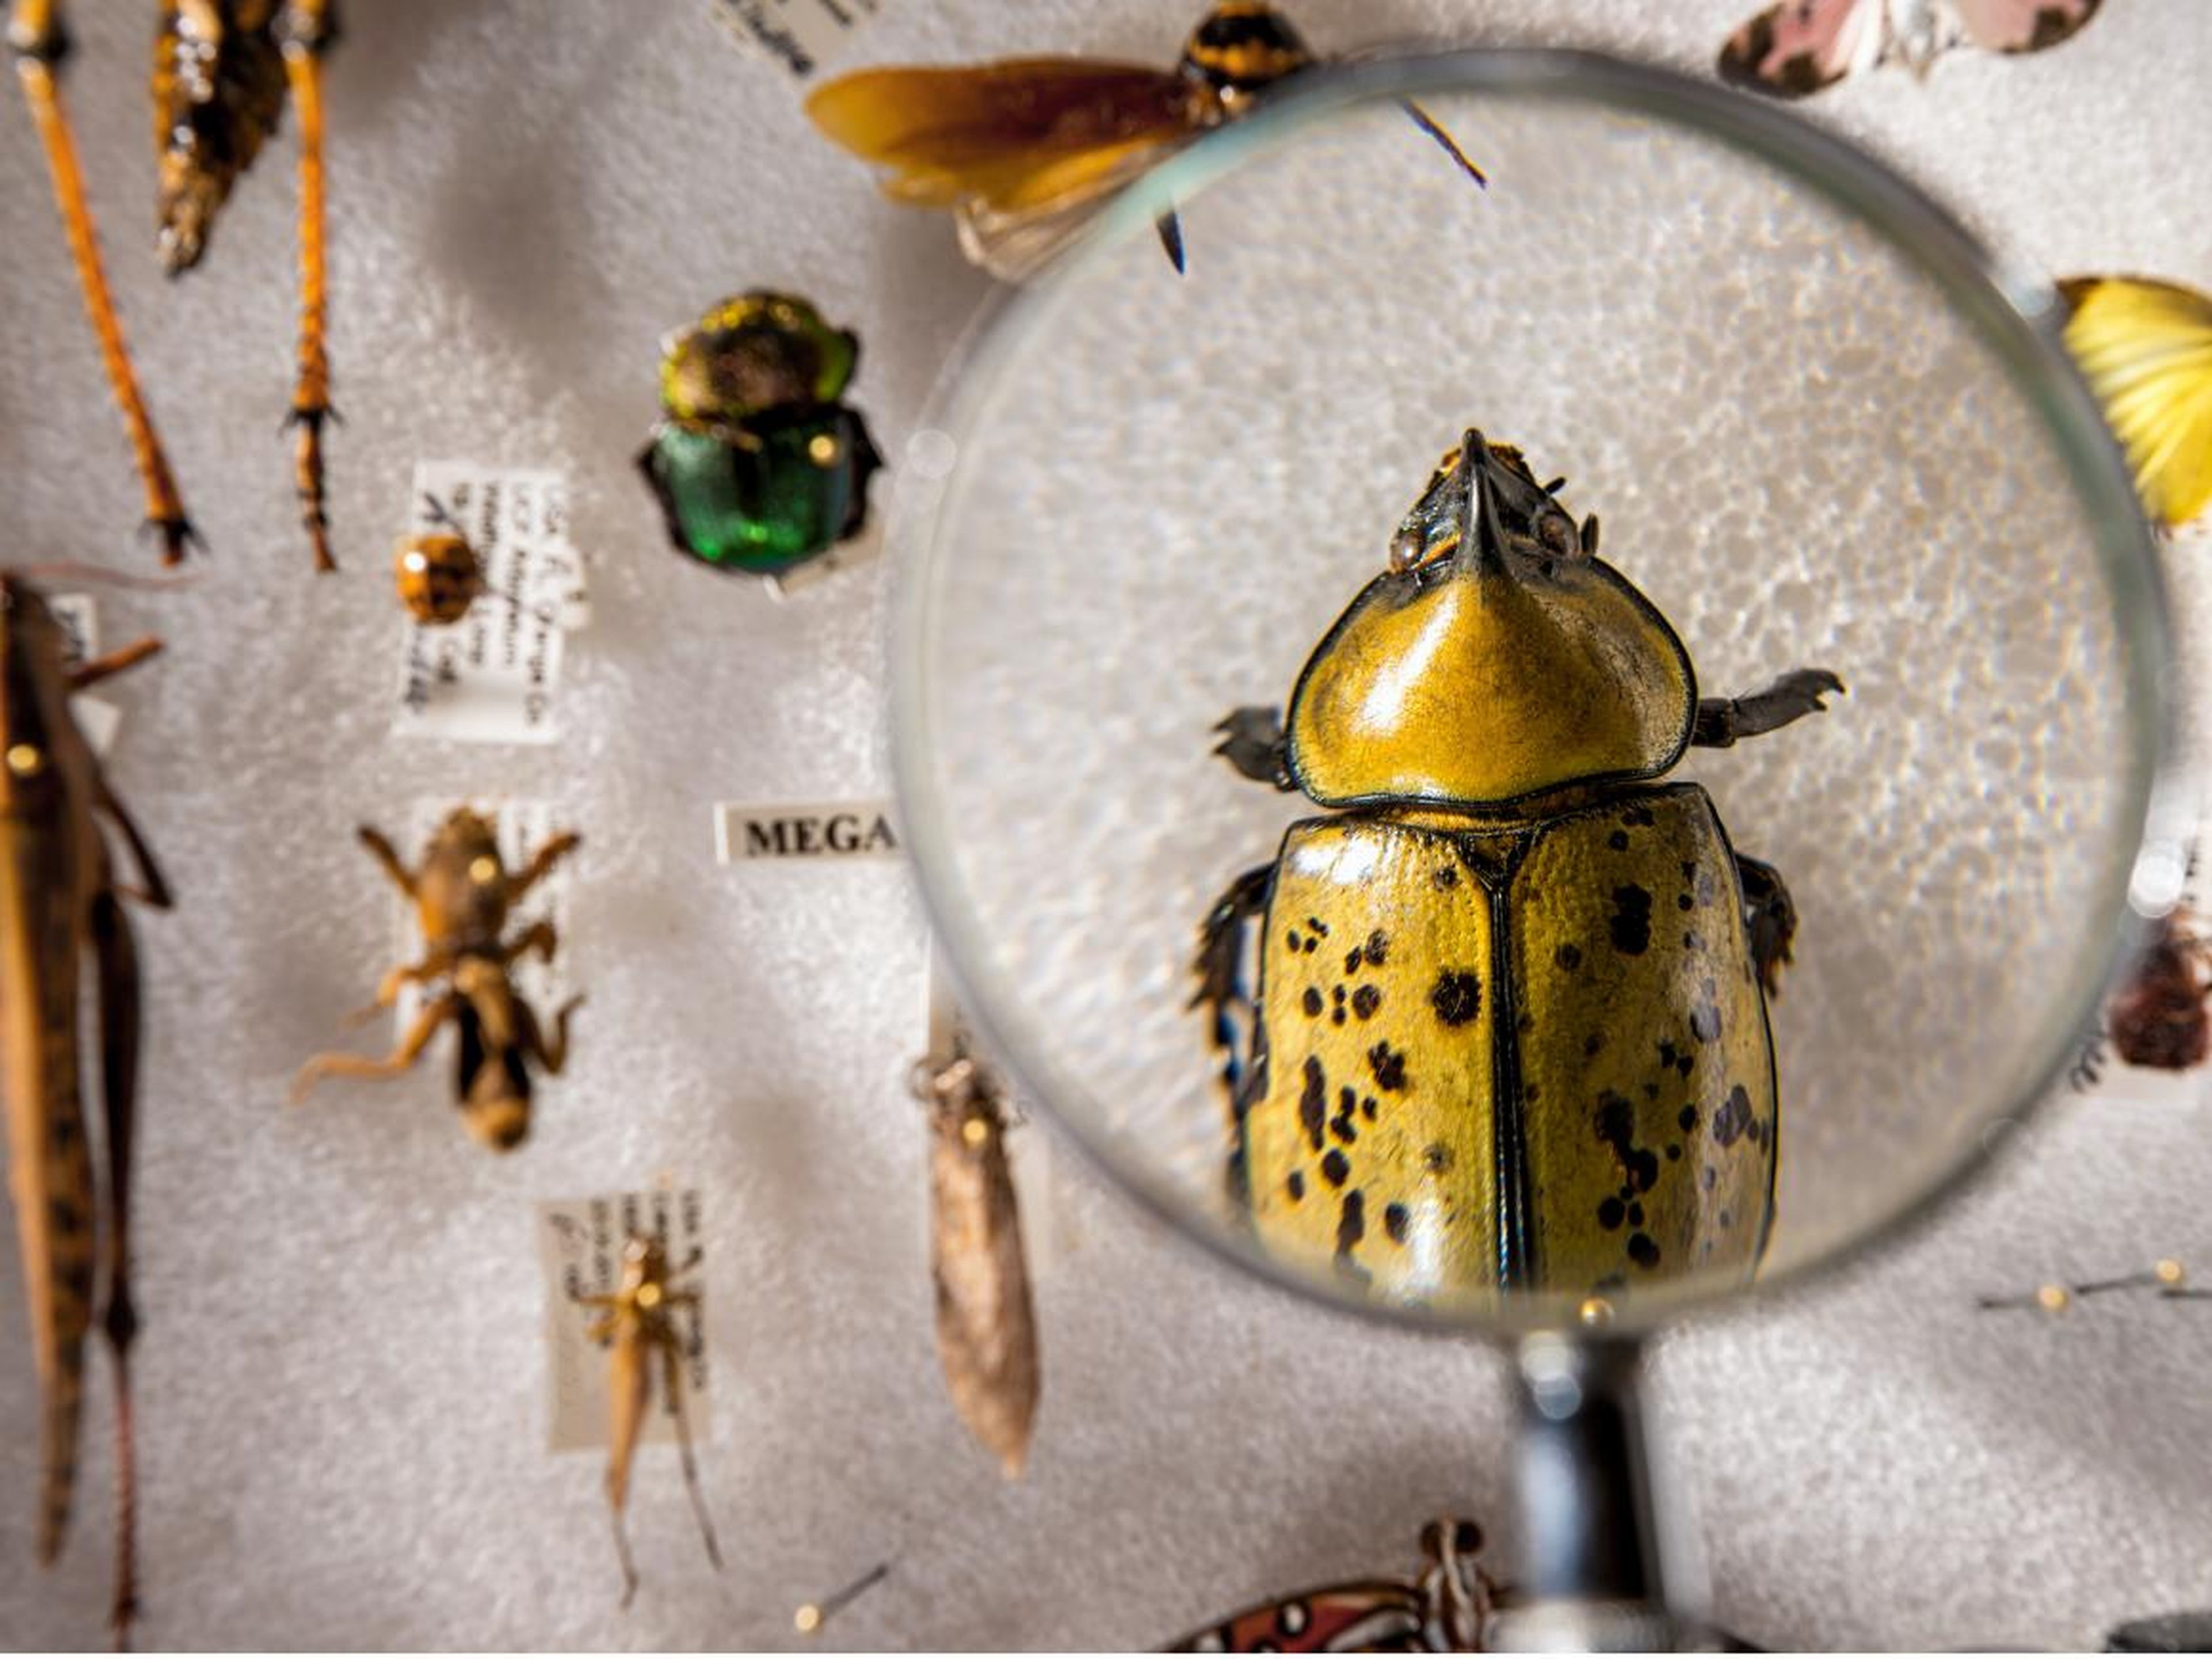 Insects are going extinct eight times as fast as mammals, birds, and reptiles.